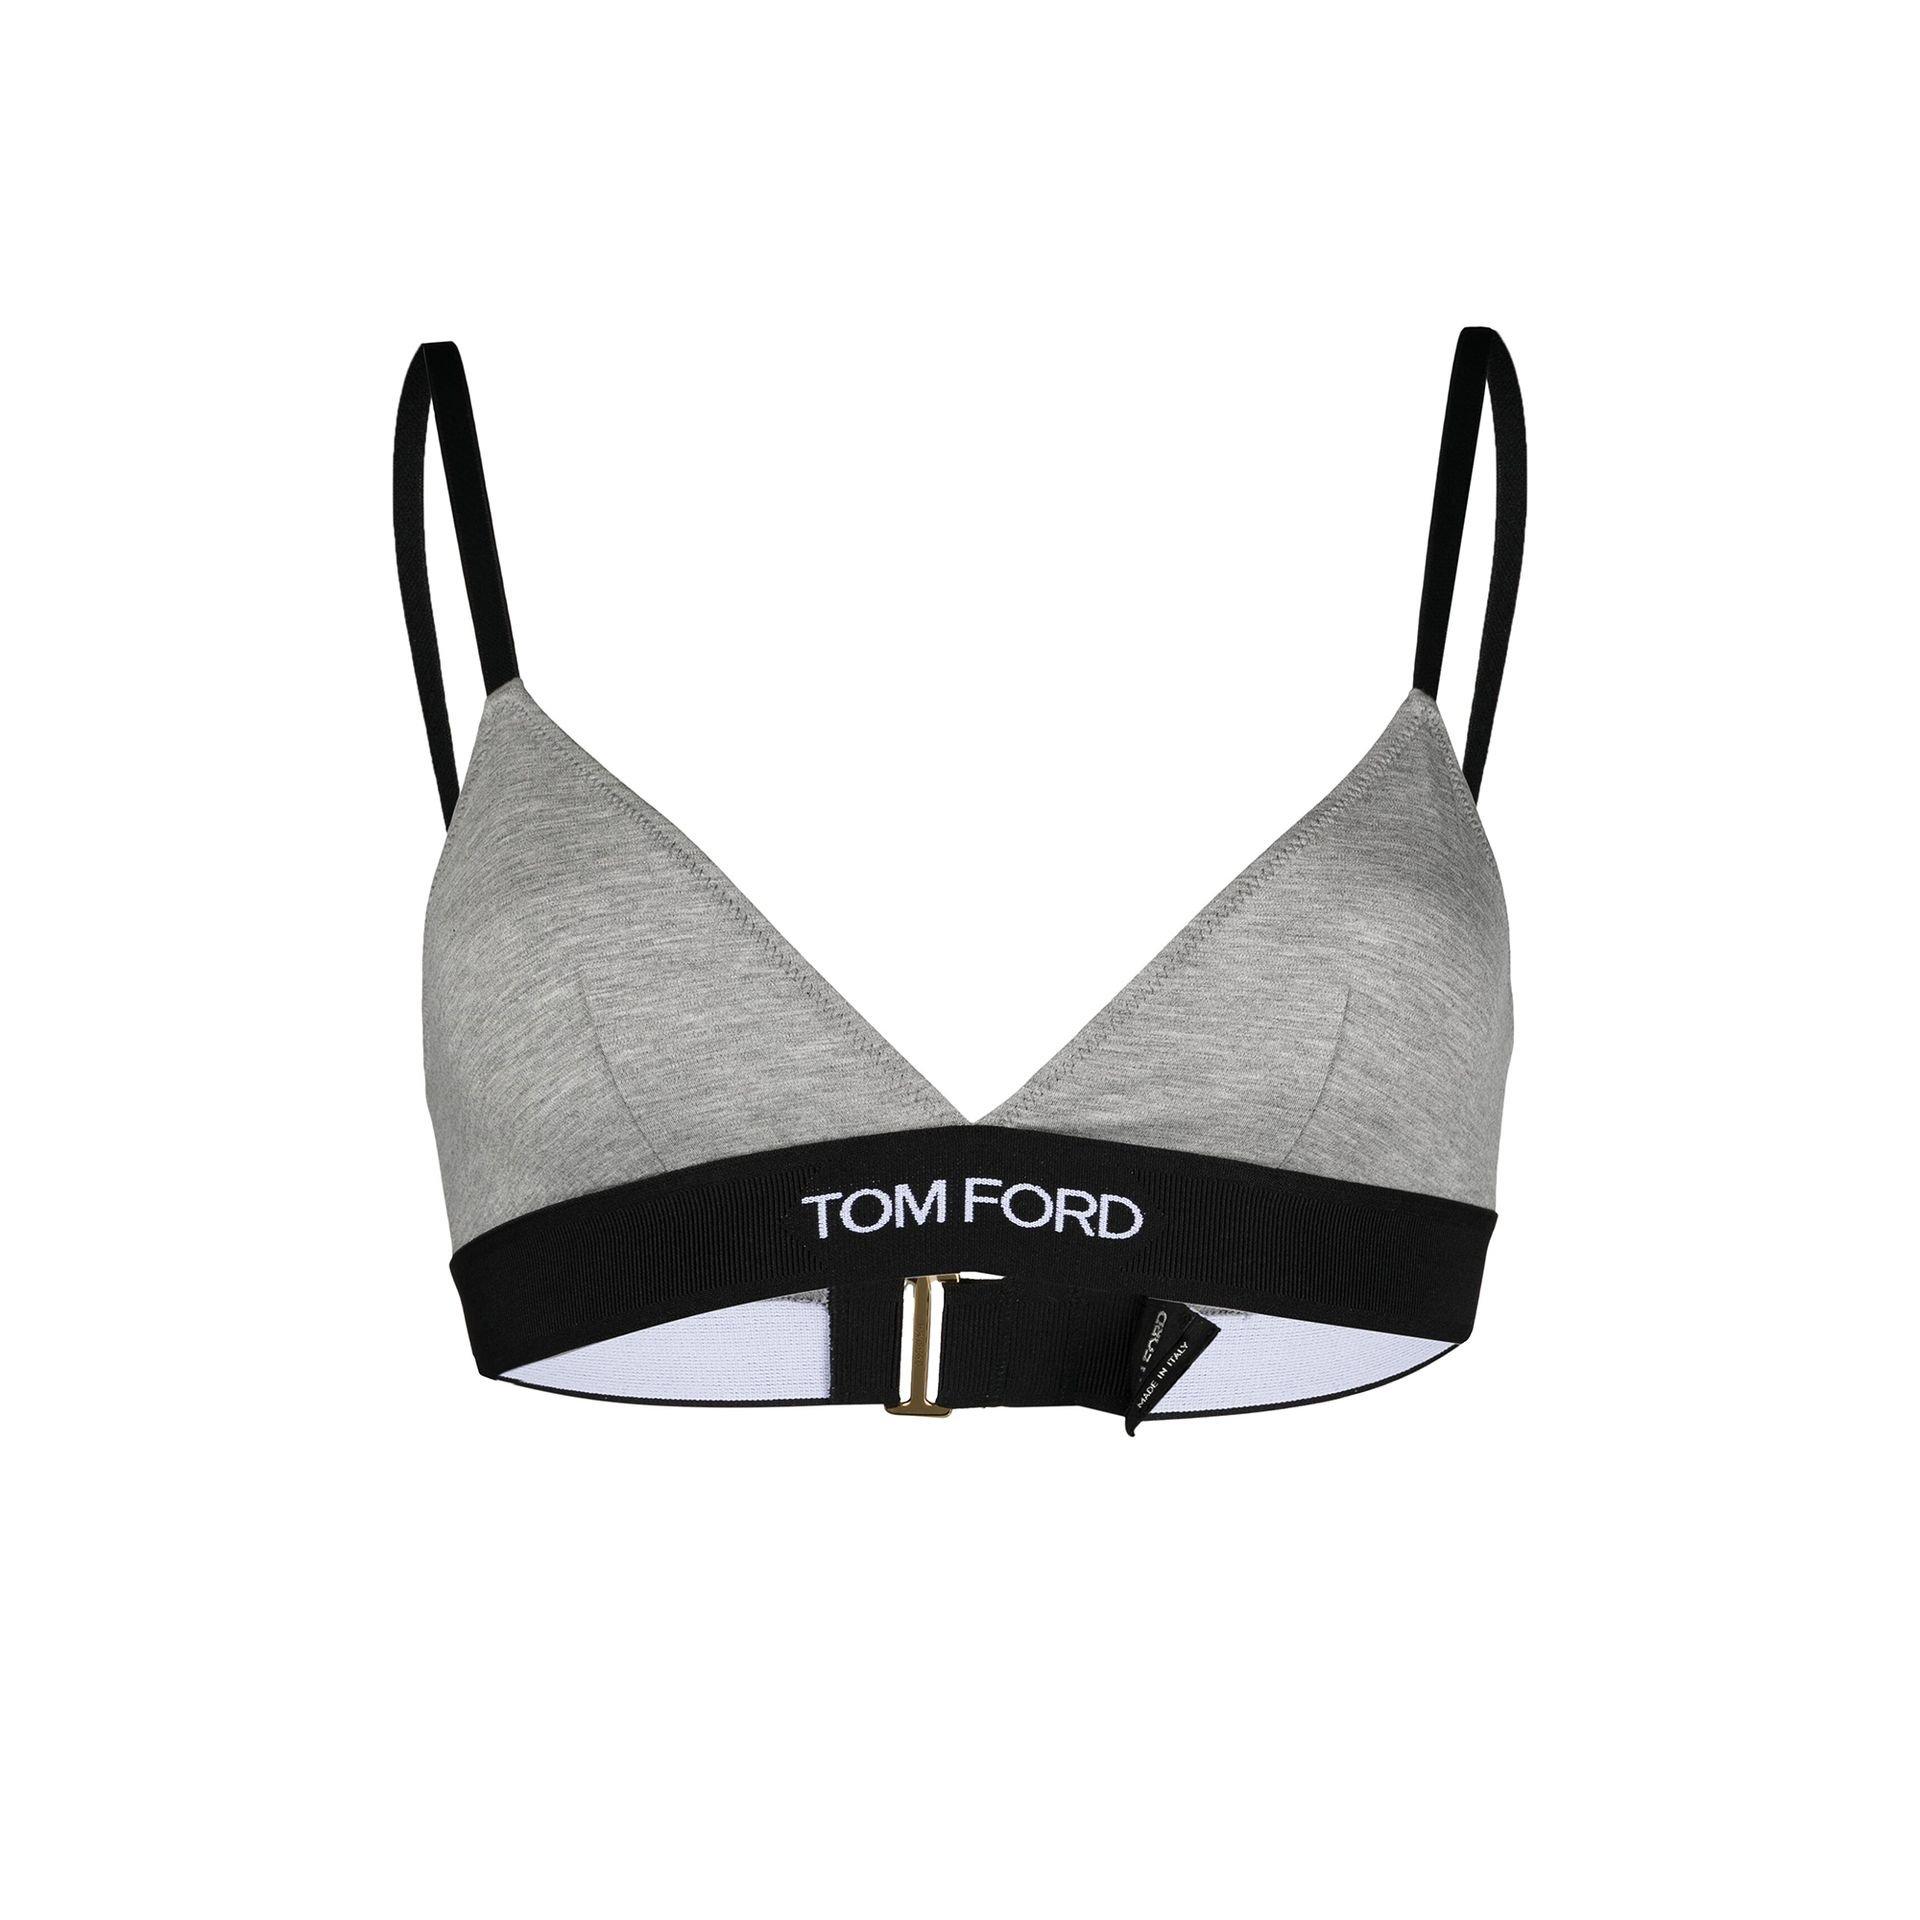 Tom Ford Logo Jersey Triangle Bra in Natural Womens Lingerie Tom Ford Lingerie 